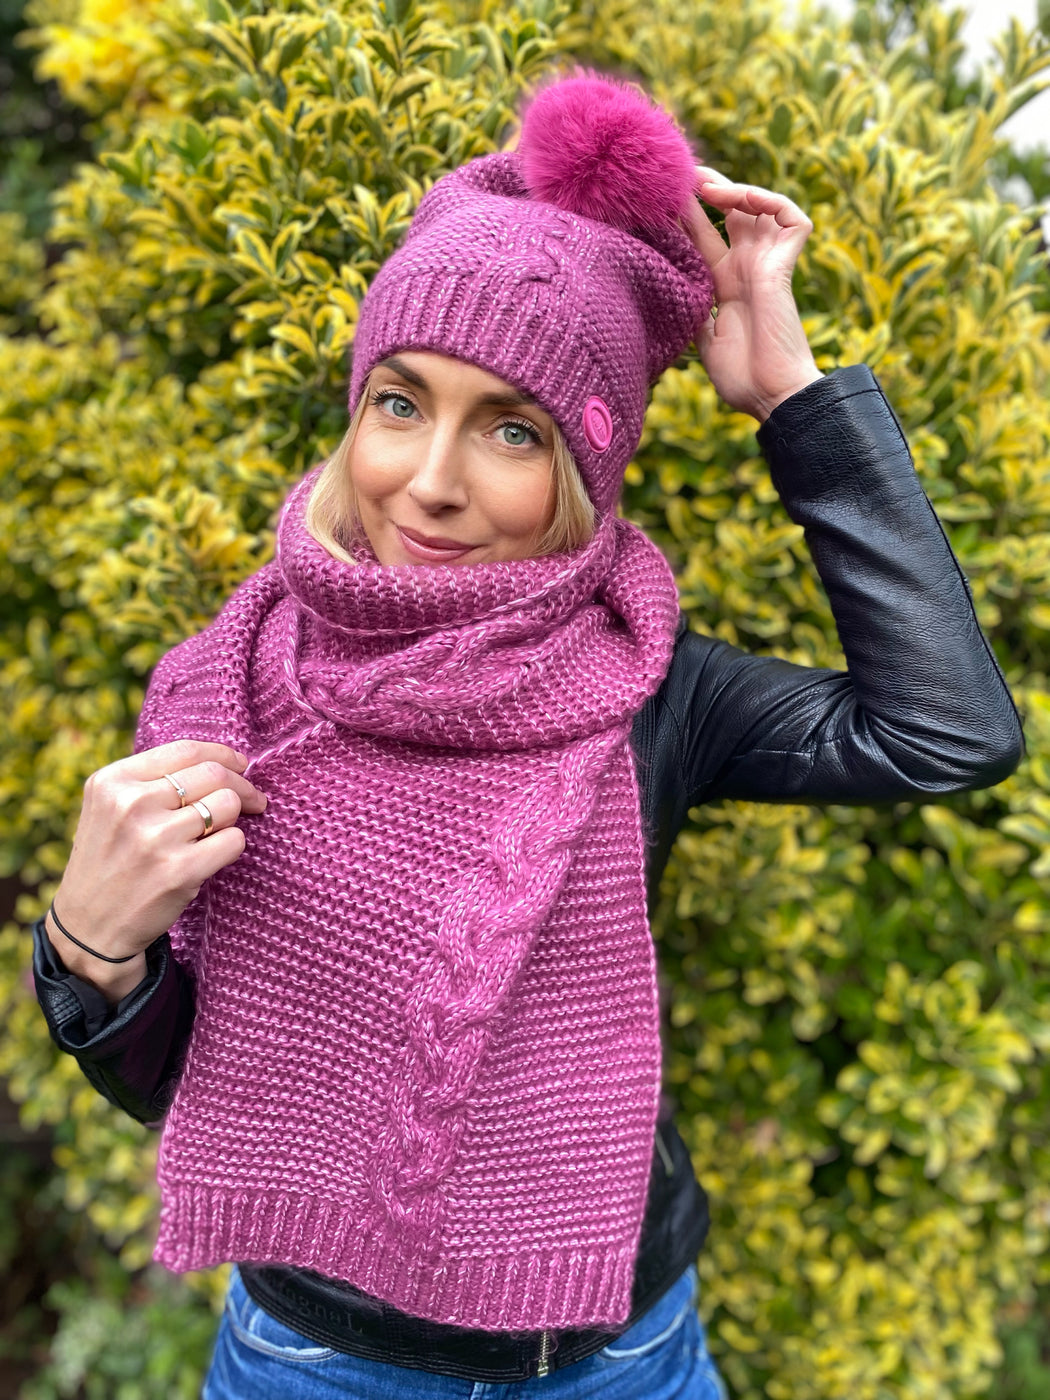 Guess cable knit Pom Pom in magenta